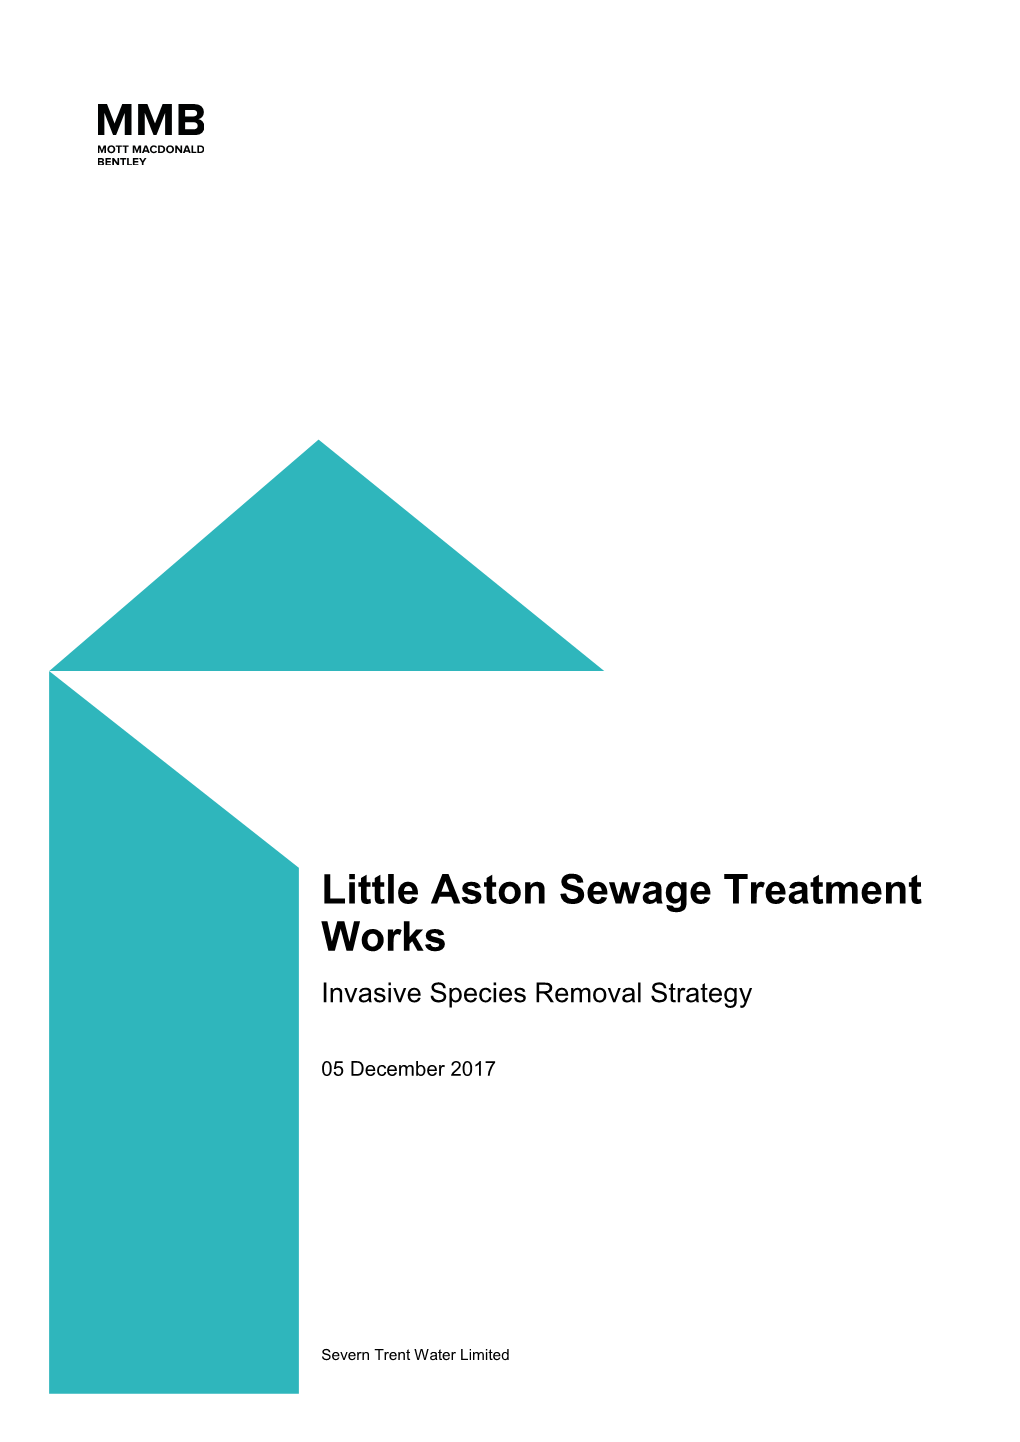 Little Aston Sewage Treatment Works Invasive Species Removal Strategy